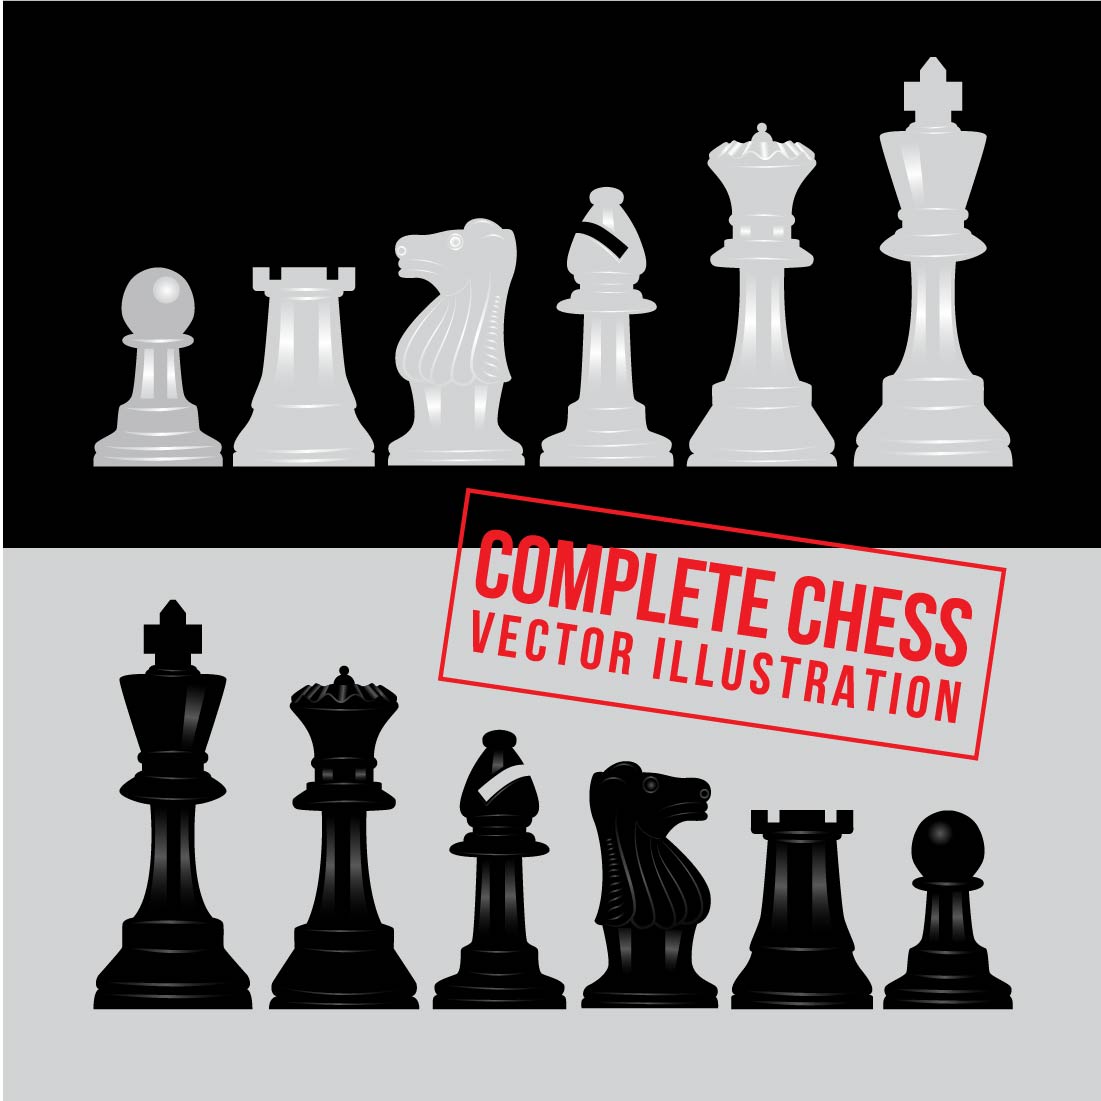 Complete Chess Vector Illustration.